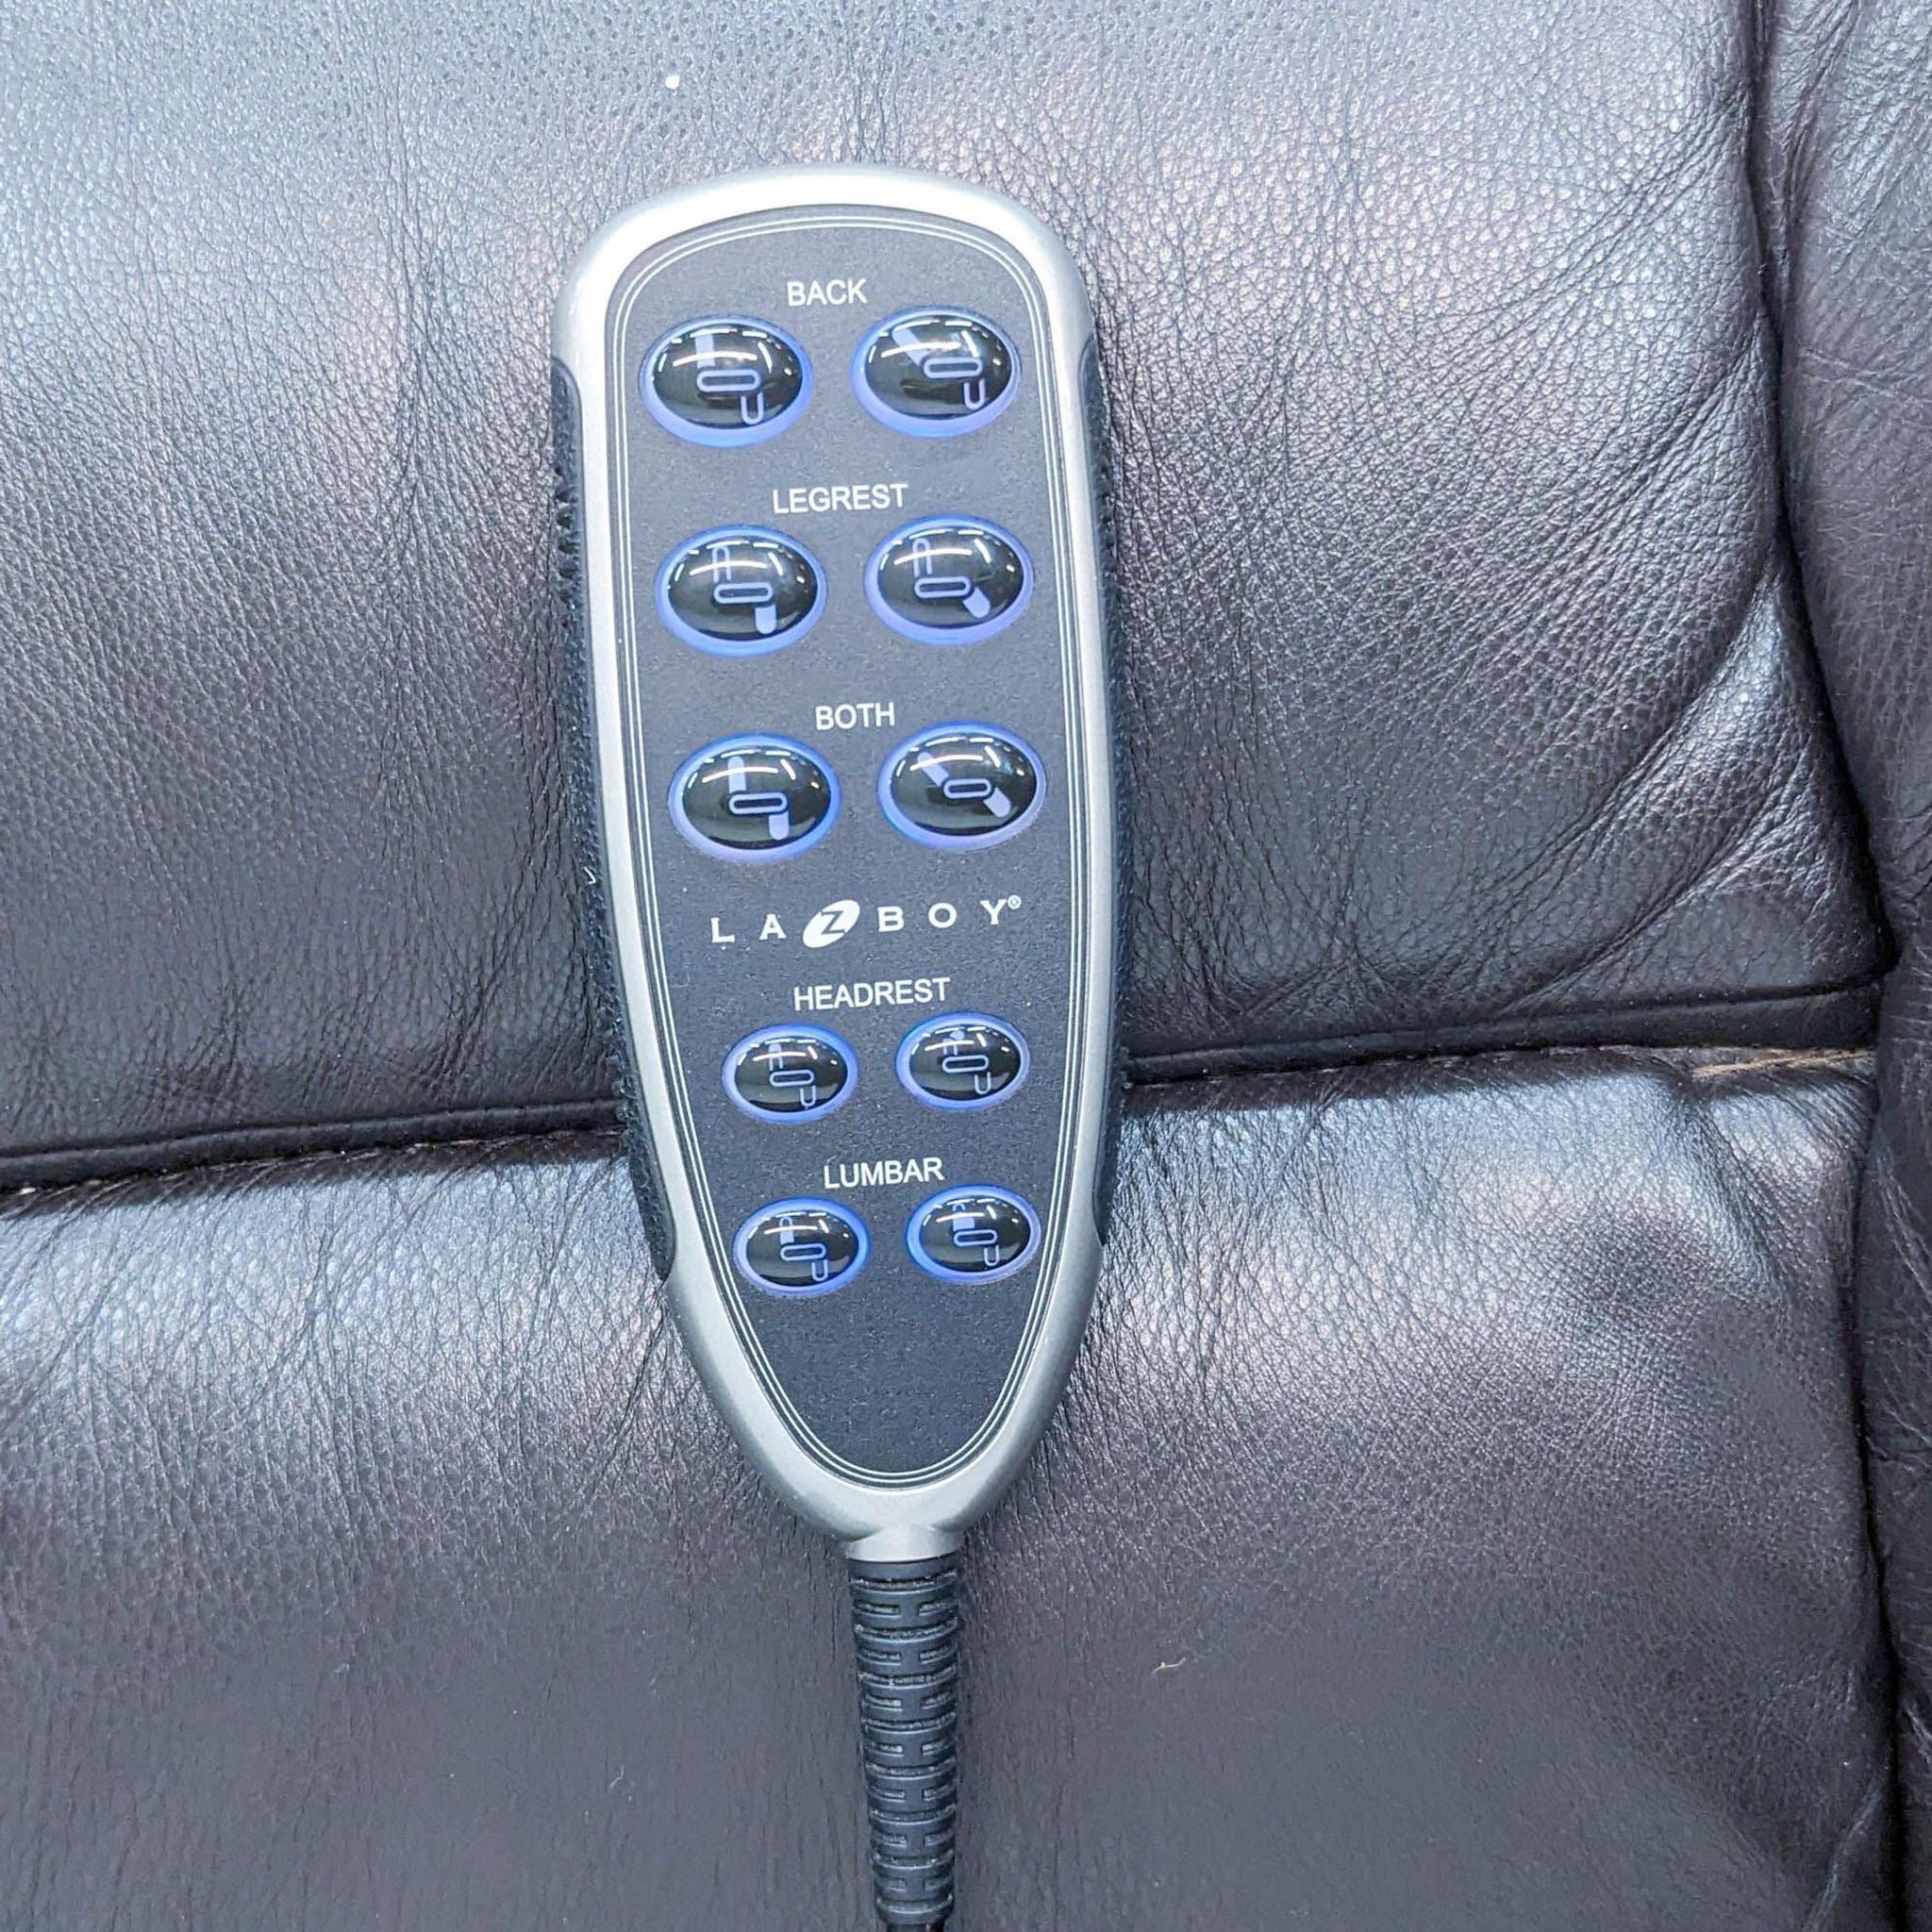 Handheld power control with buttons for back, leg rest, headrest, and lumbar on a La-Z-Boy Greyson power recliner.